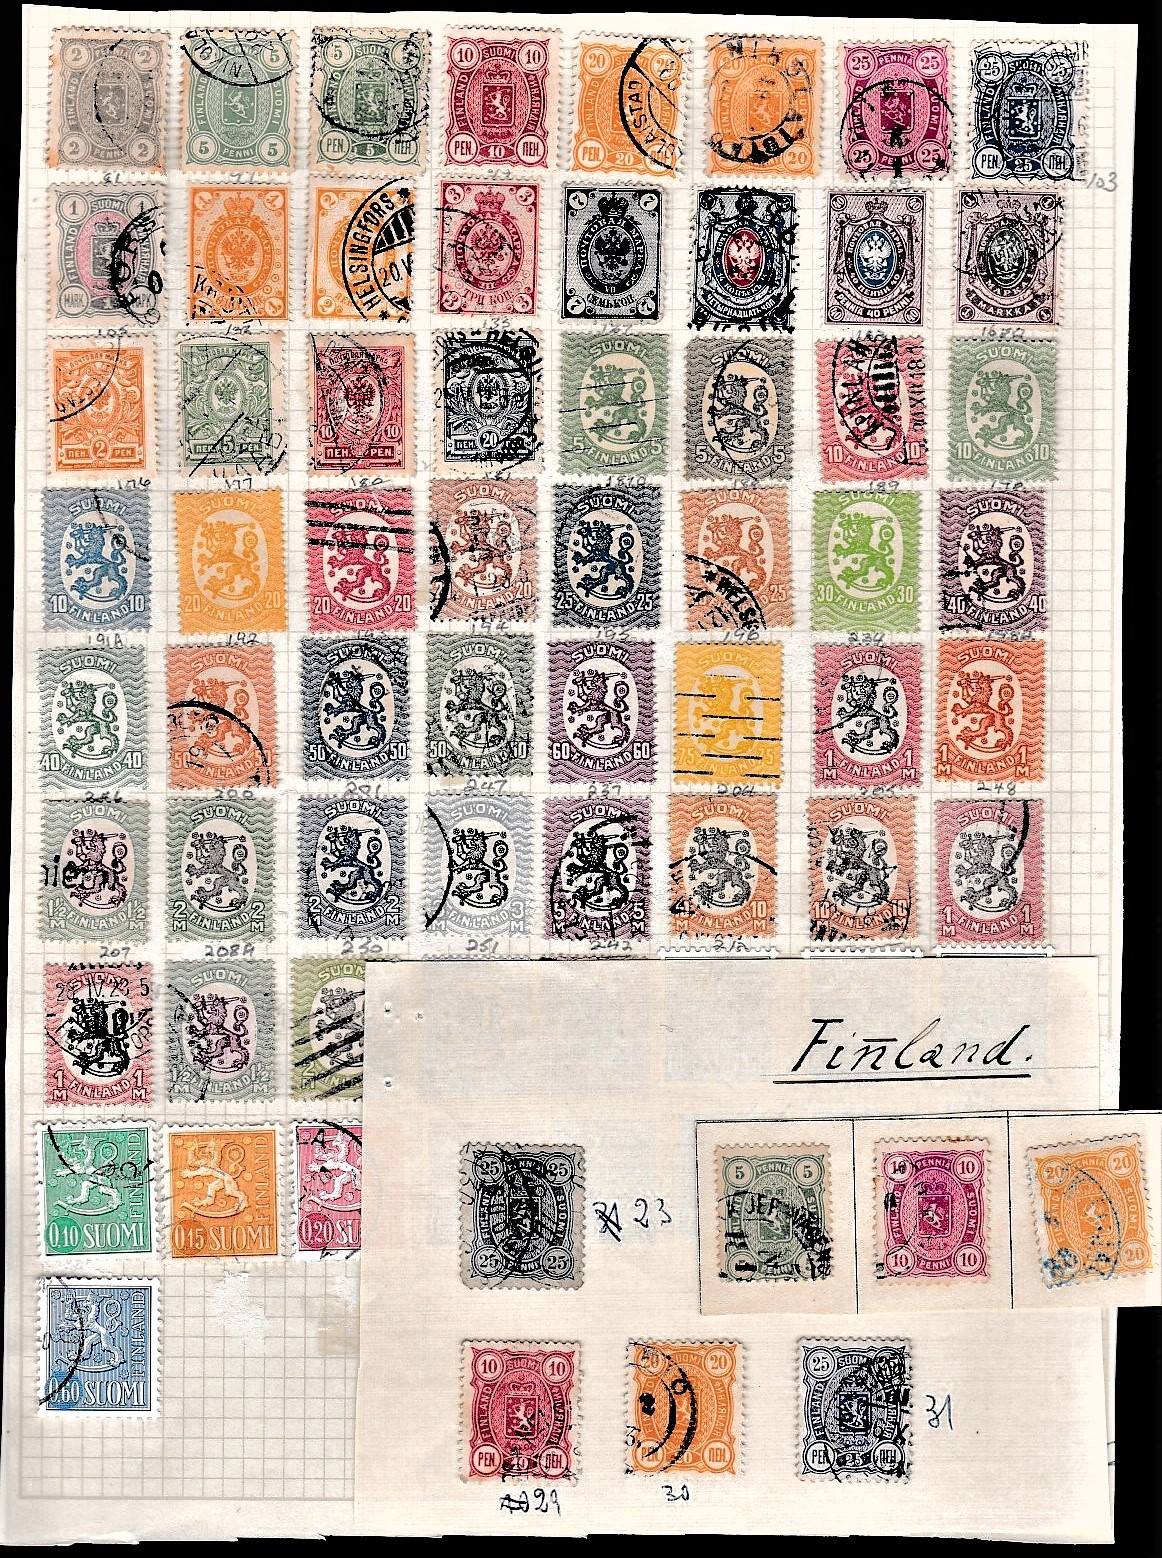 Finland 1875-1963 - used definitives on a sheet (72)